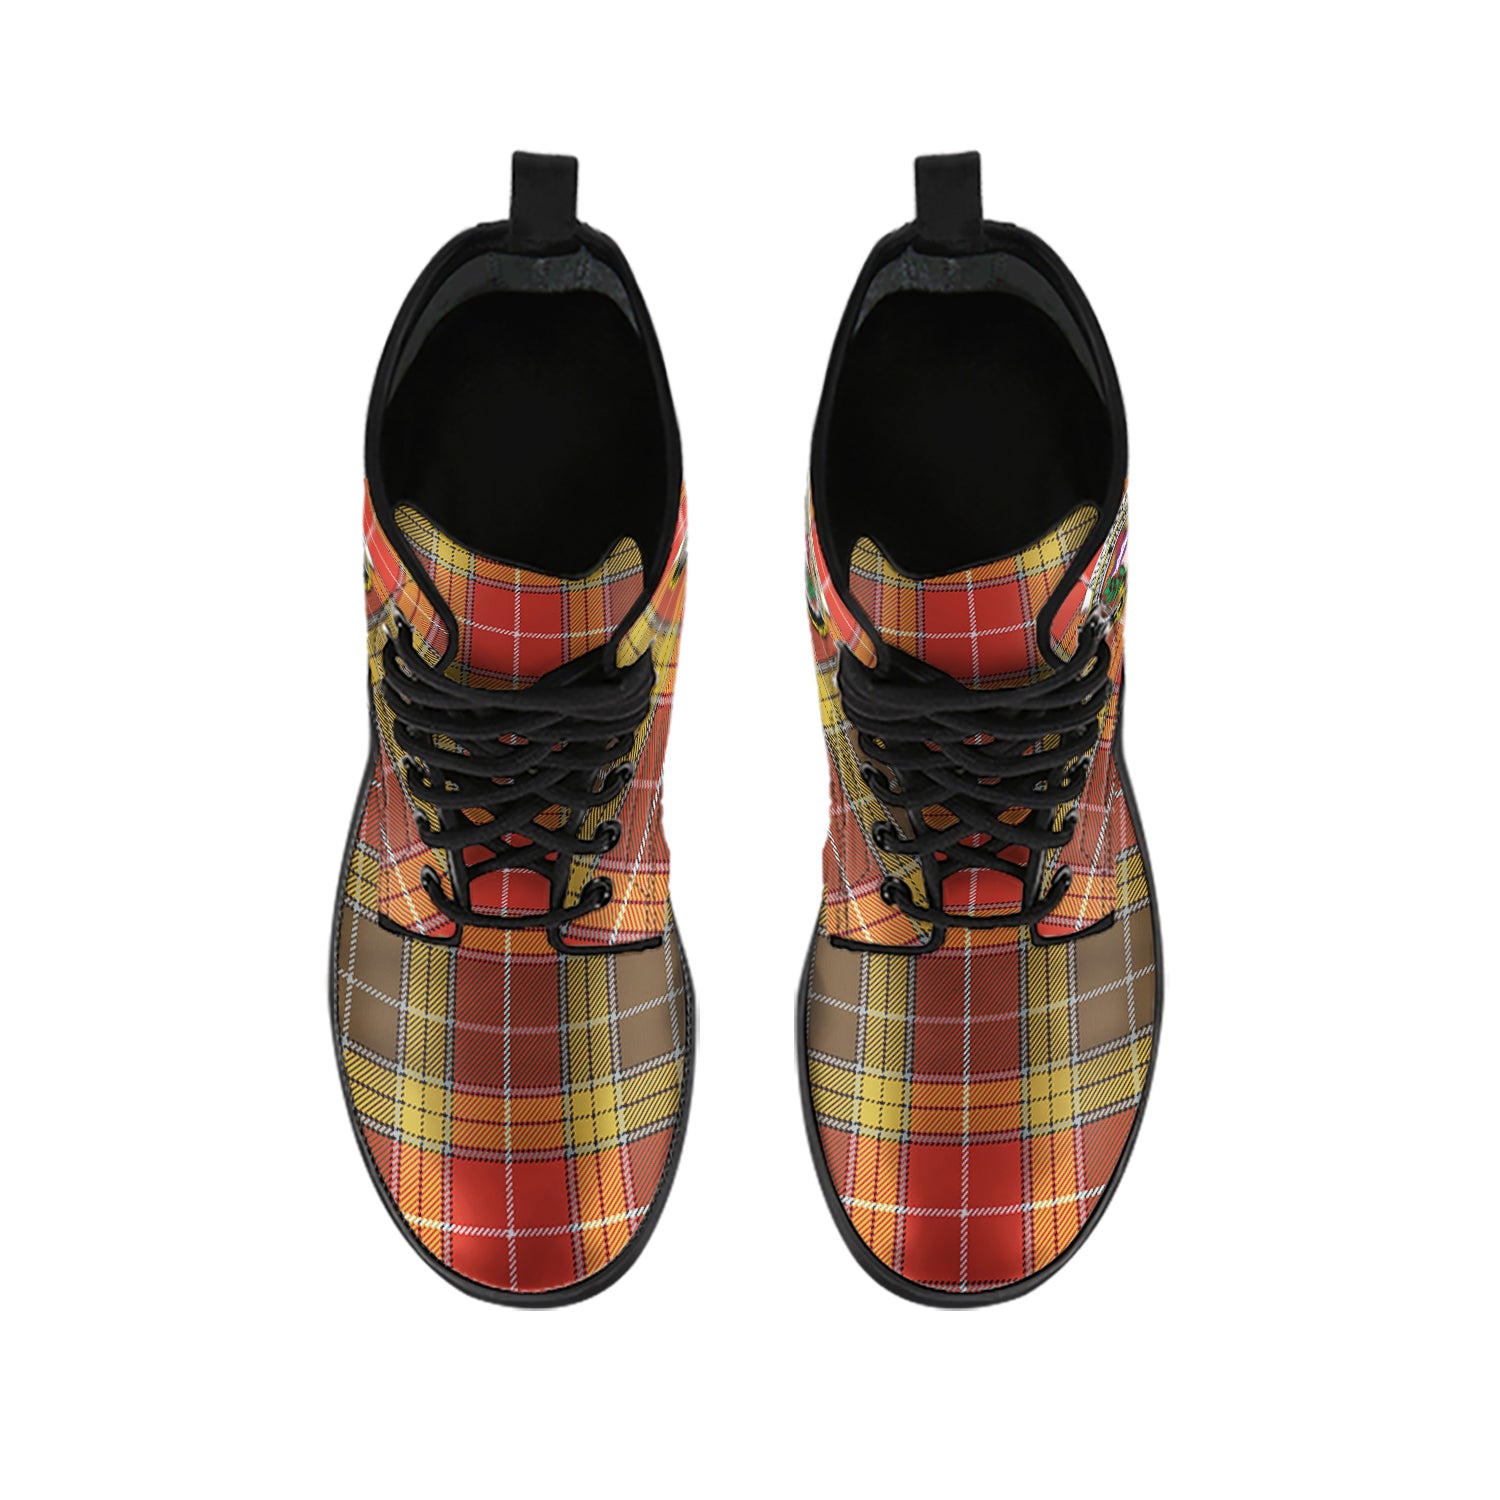 Buchanan Old Set Weathered Tartan Leather Boots with Family Crest - Tartanvibesclothing